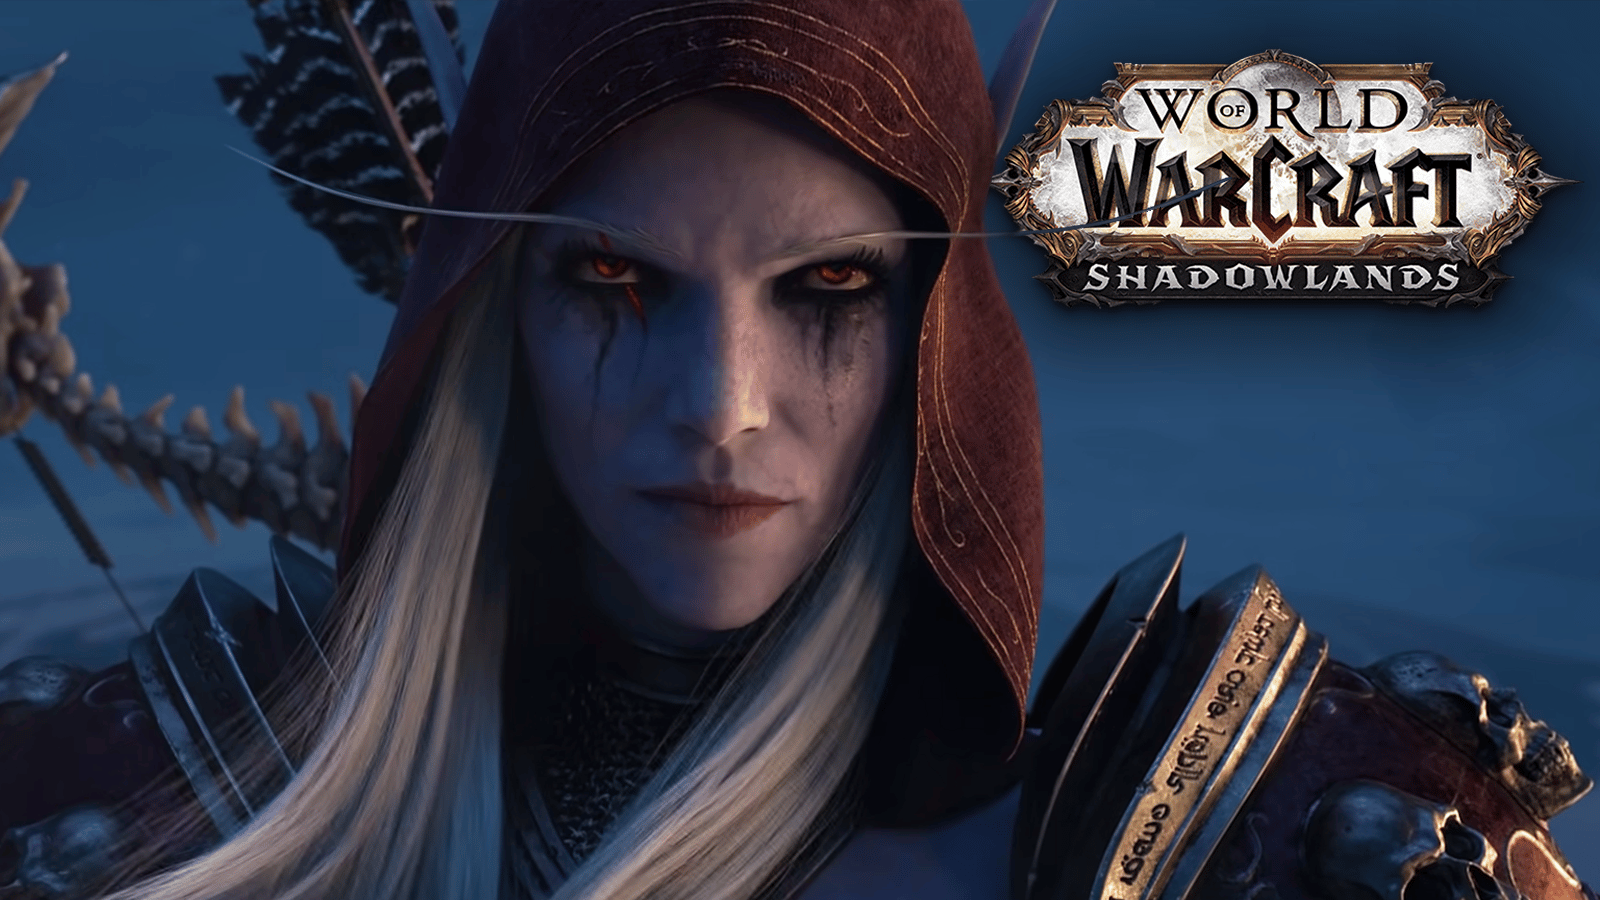 It looks like Sylvanas is fully prepared to destroy Azeroth to achieve her goals in World of Warcraft expansion Shadowlands.